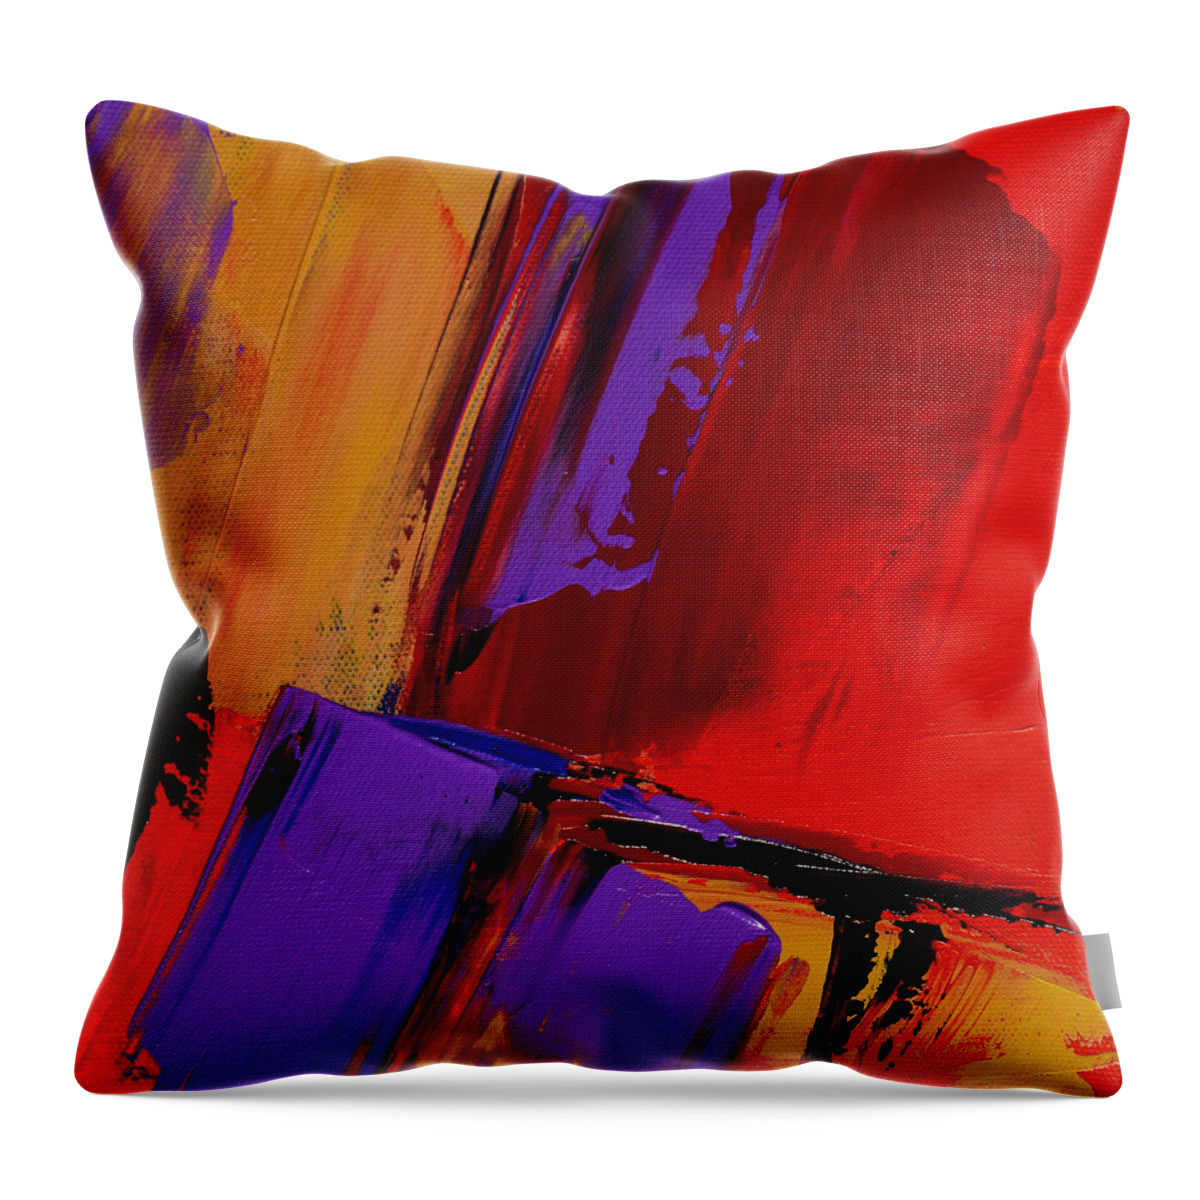 Abstract Throw Pillow featuring the painting Up and Down - Art by Elise Palmigiani by Elise Palmigiani